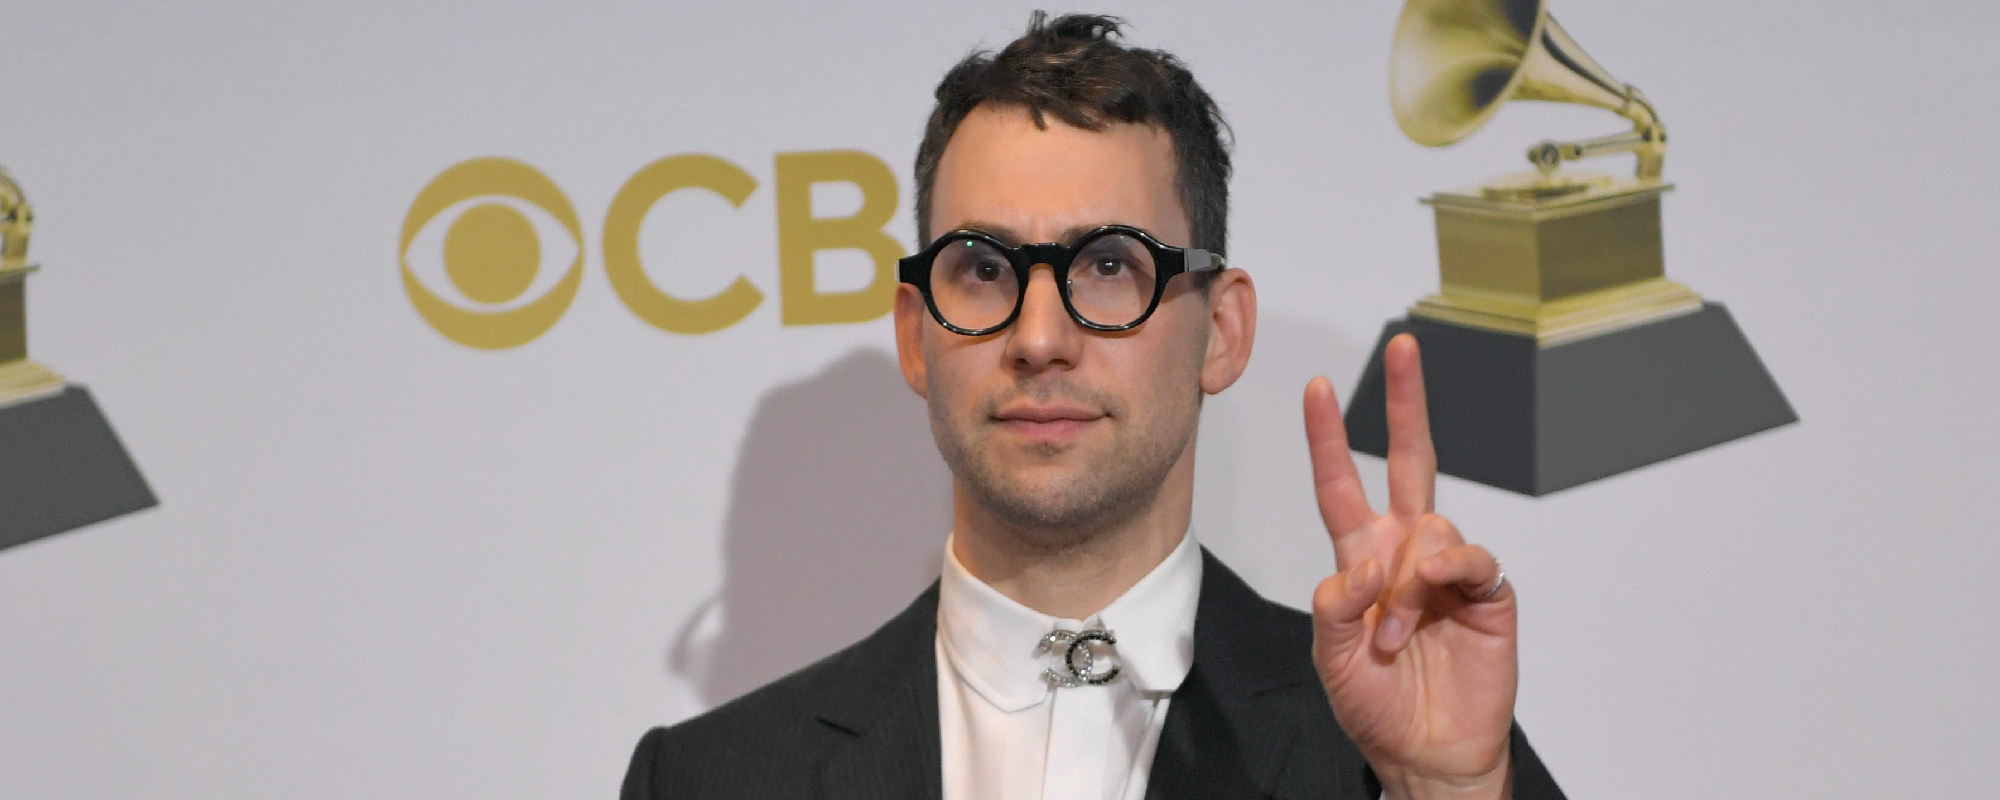 Bleachers’ Jack Antonoff Labels Kanye West a “B*tch” Over Latest Album News as Feud Continues